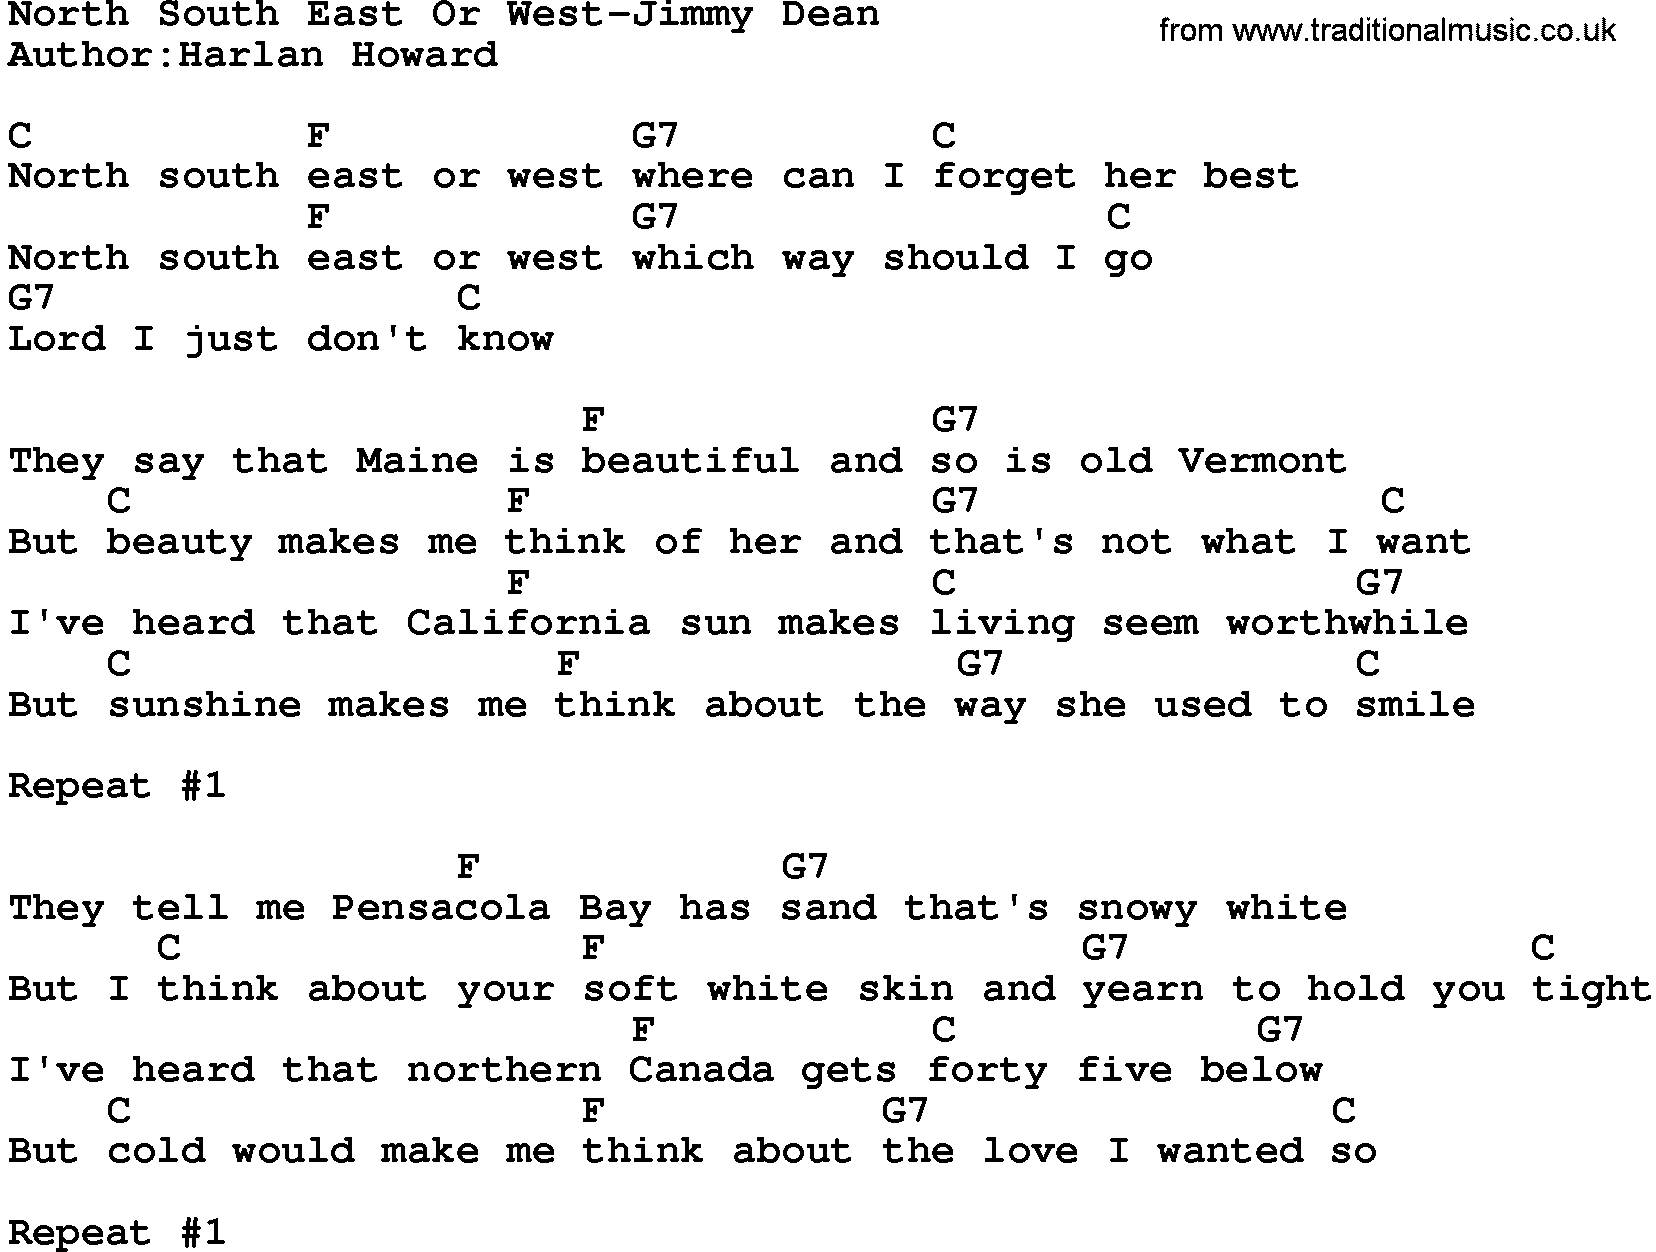 Country music song: North South East Or West-Jimmy Dean lyrics and chords